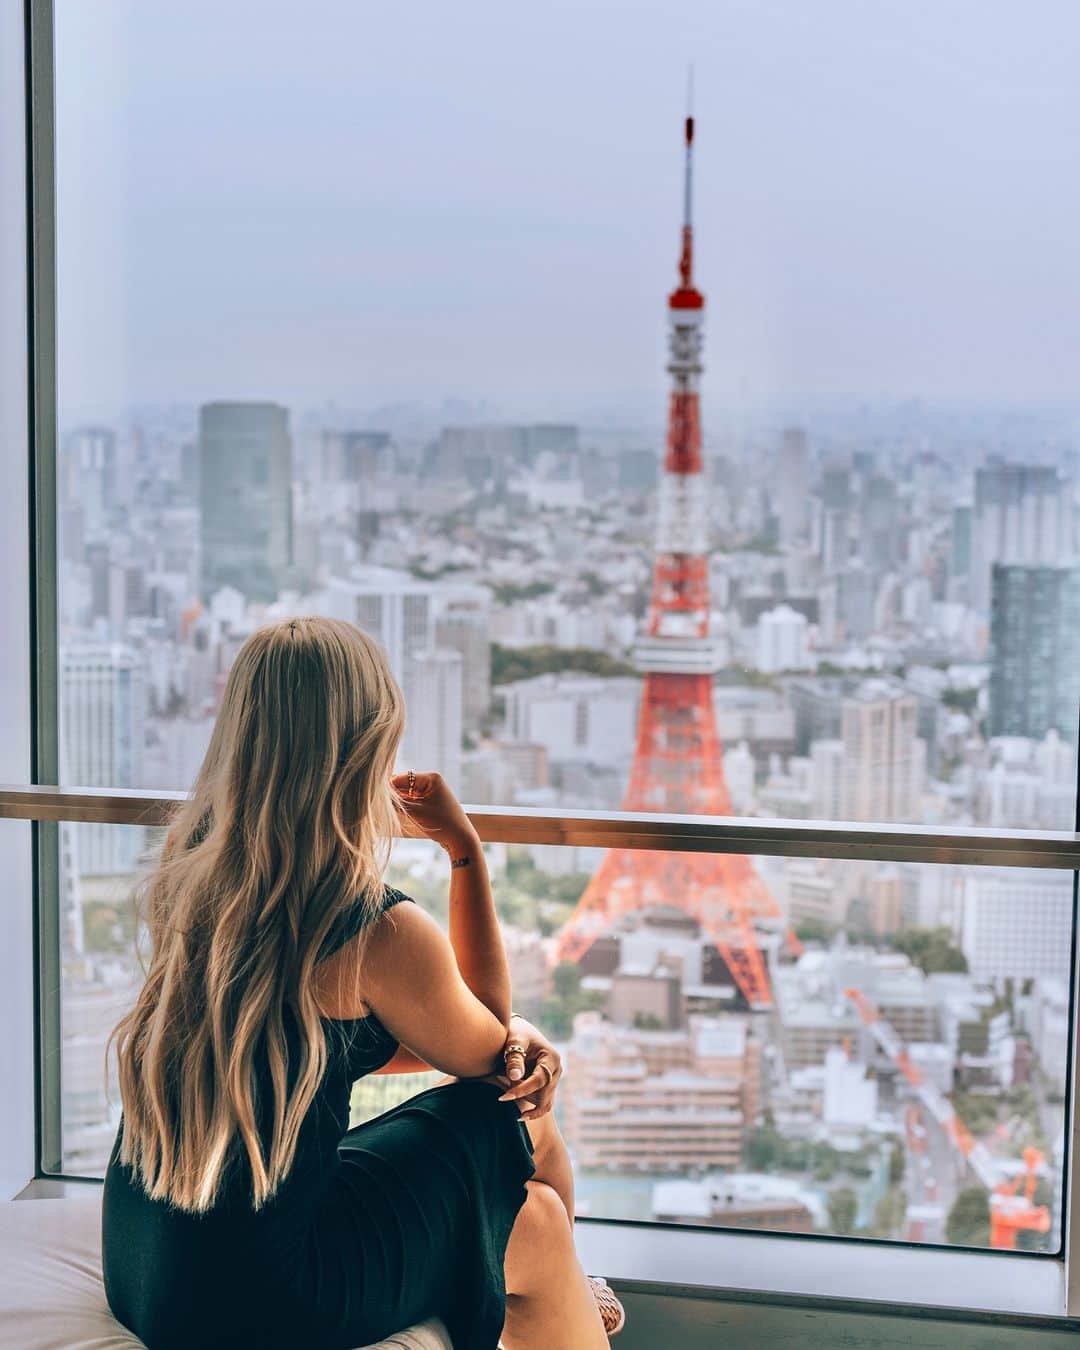 Andaz Tokyo アンダーズ 東京さんのインスタグラム写真 - (Andaz Tokyo アンダーズ 東京Instagram)「夏休みの予定はお決まりですか？2023年7月1日~2023年9月15日までの期間中、アンダーズ 東京を含む欧州、アフリカ、中東、アジア太平洋地域の400件以上の参加ホテルで2回目以降の対象となるご滞在を完了すると、2倍のポイント（最大25,000ポイント）を獲得いただける「ダブルポイント キャンペーン」を実施中です。2023年7月31日までにワールド オブ ハイアットにご登録の上、キャンペーンへのエントリーをお済ませください。  Have you already planned your summer vacations? Earn double points (up to 25,000 points) starting with your second qualifying stays at participating hotels in Europe, Africa, the Middle East, and Asia-Pacific, including Andaz Tokyo, from July 1 to Sept 15, 2023. Register with your World of Hyatt account by July 31, 2023 to avail of this promotion. Terms apply.  Photo by @cherrielynn  #アンダーズ東京 #東京ホテル #ホテルステイ #ライフスタイルホテル #ラグジュアリーホテル #虎ノ門 #虎ノ門ヒルズ #東京タワーが好き #夏休みの思い出 #andaztokyo #beautifulhotels #tokyohotel #toranomon #lifestylehotel #andaztokyo #tokyotower #summervacation2023 #tokyo #japan #summer #andaz」6月29日 20時26分 - andaztokyo